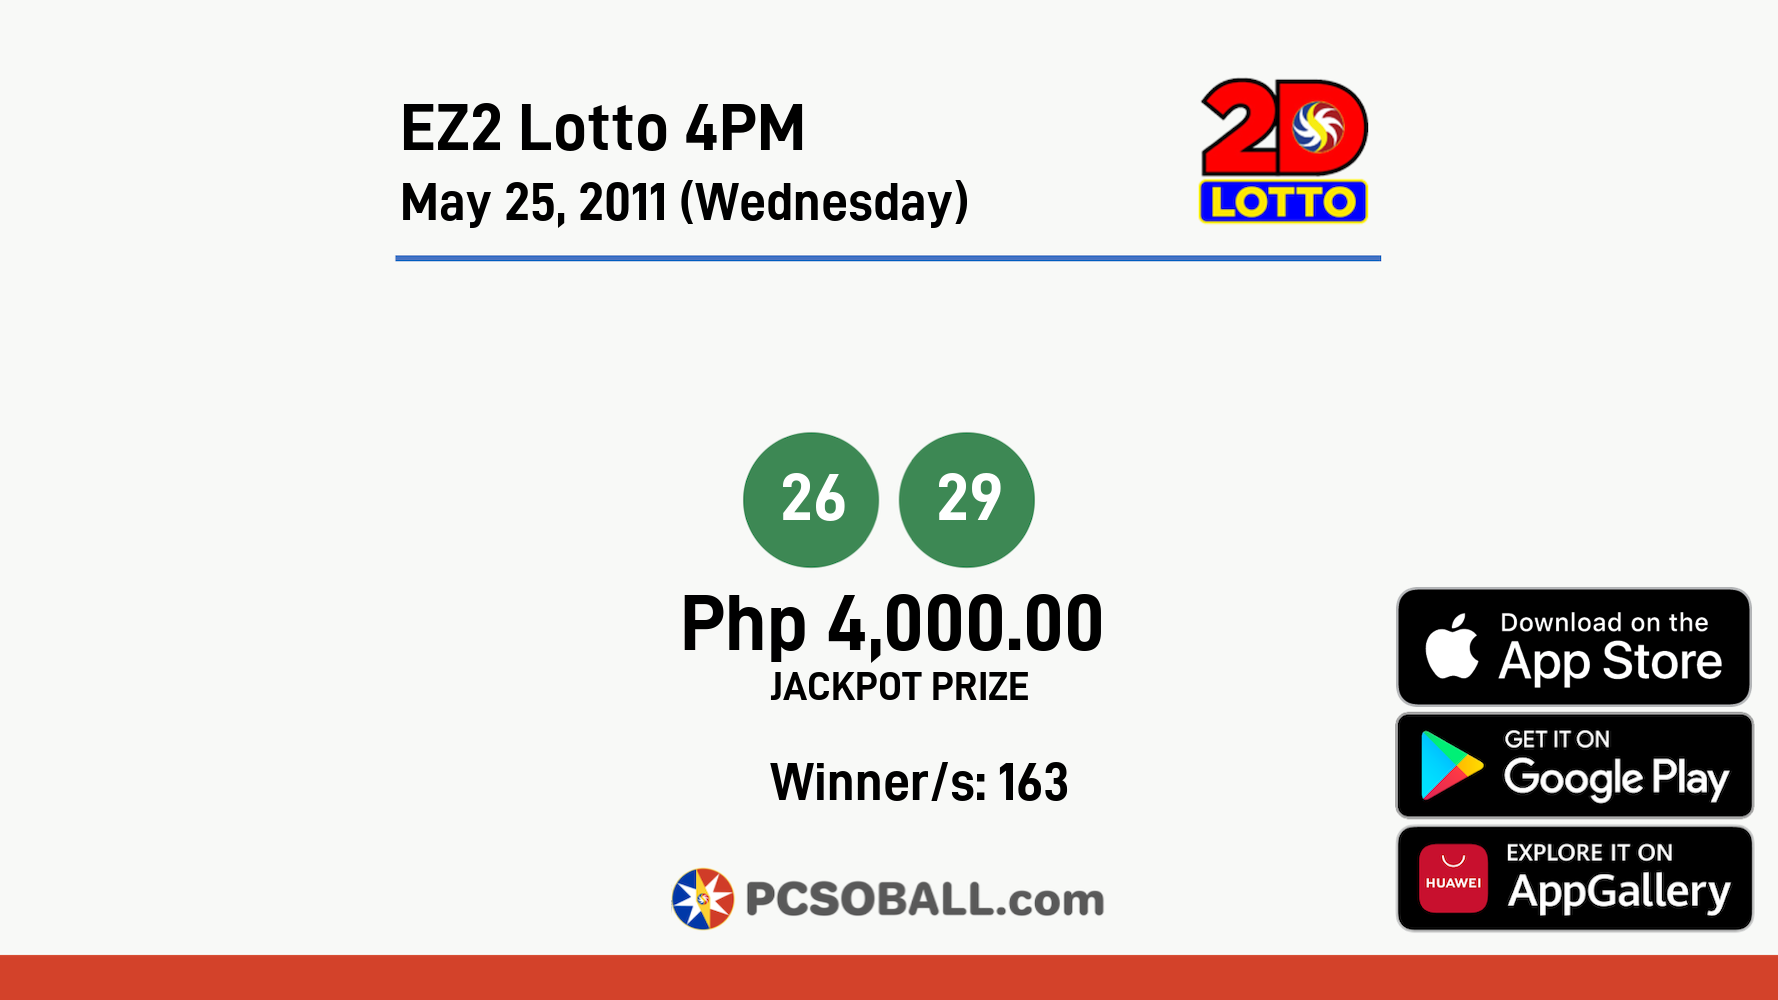 EZ2 Lotto 4PM May 25, 2011 (Wednesday) Result